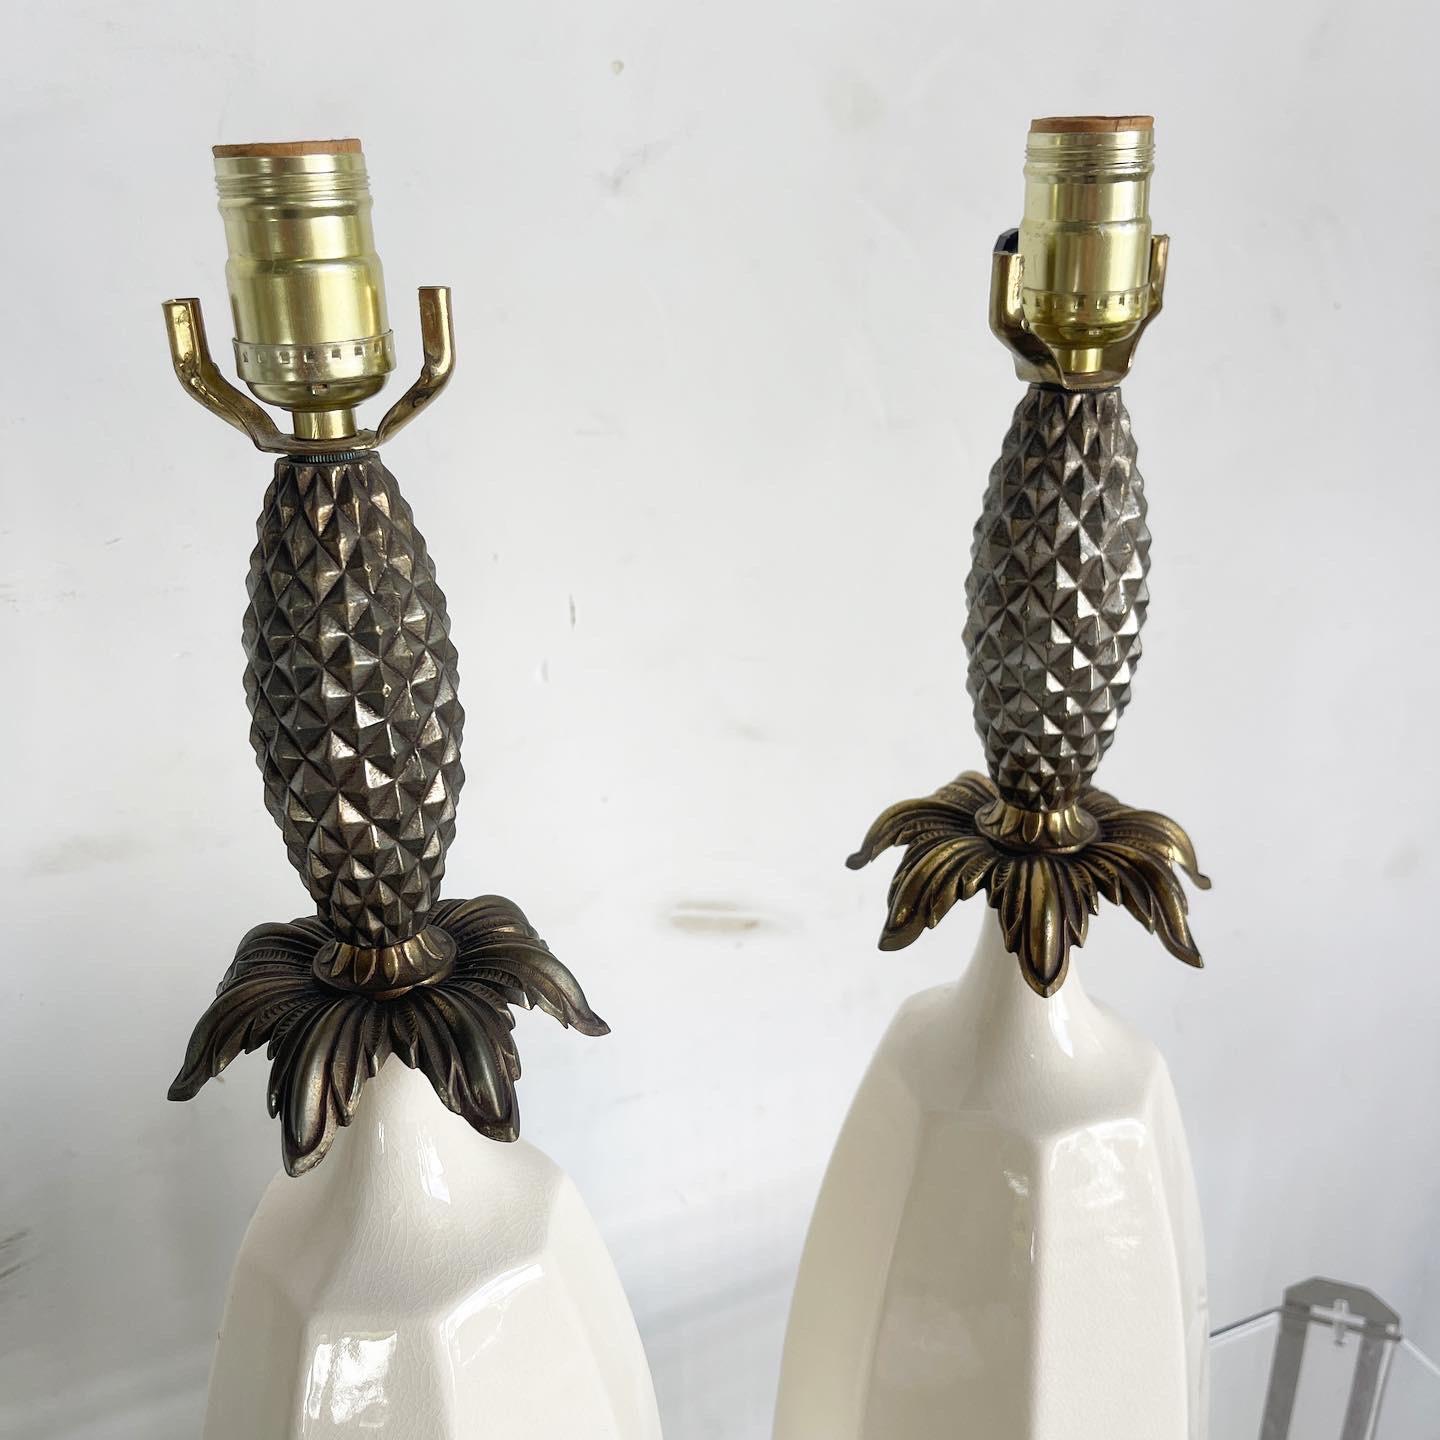 Hollywood Regency Creams Ceramic and Brass Pineapple Table Lamps - a Pair In Good Condition For Sale In Delray Beach, FL